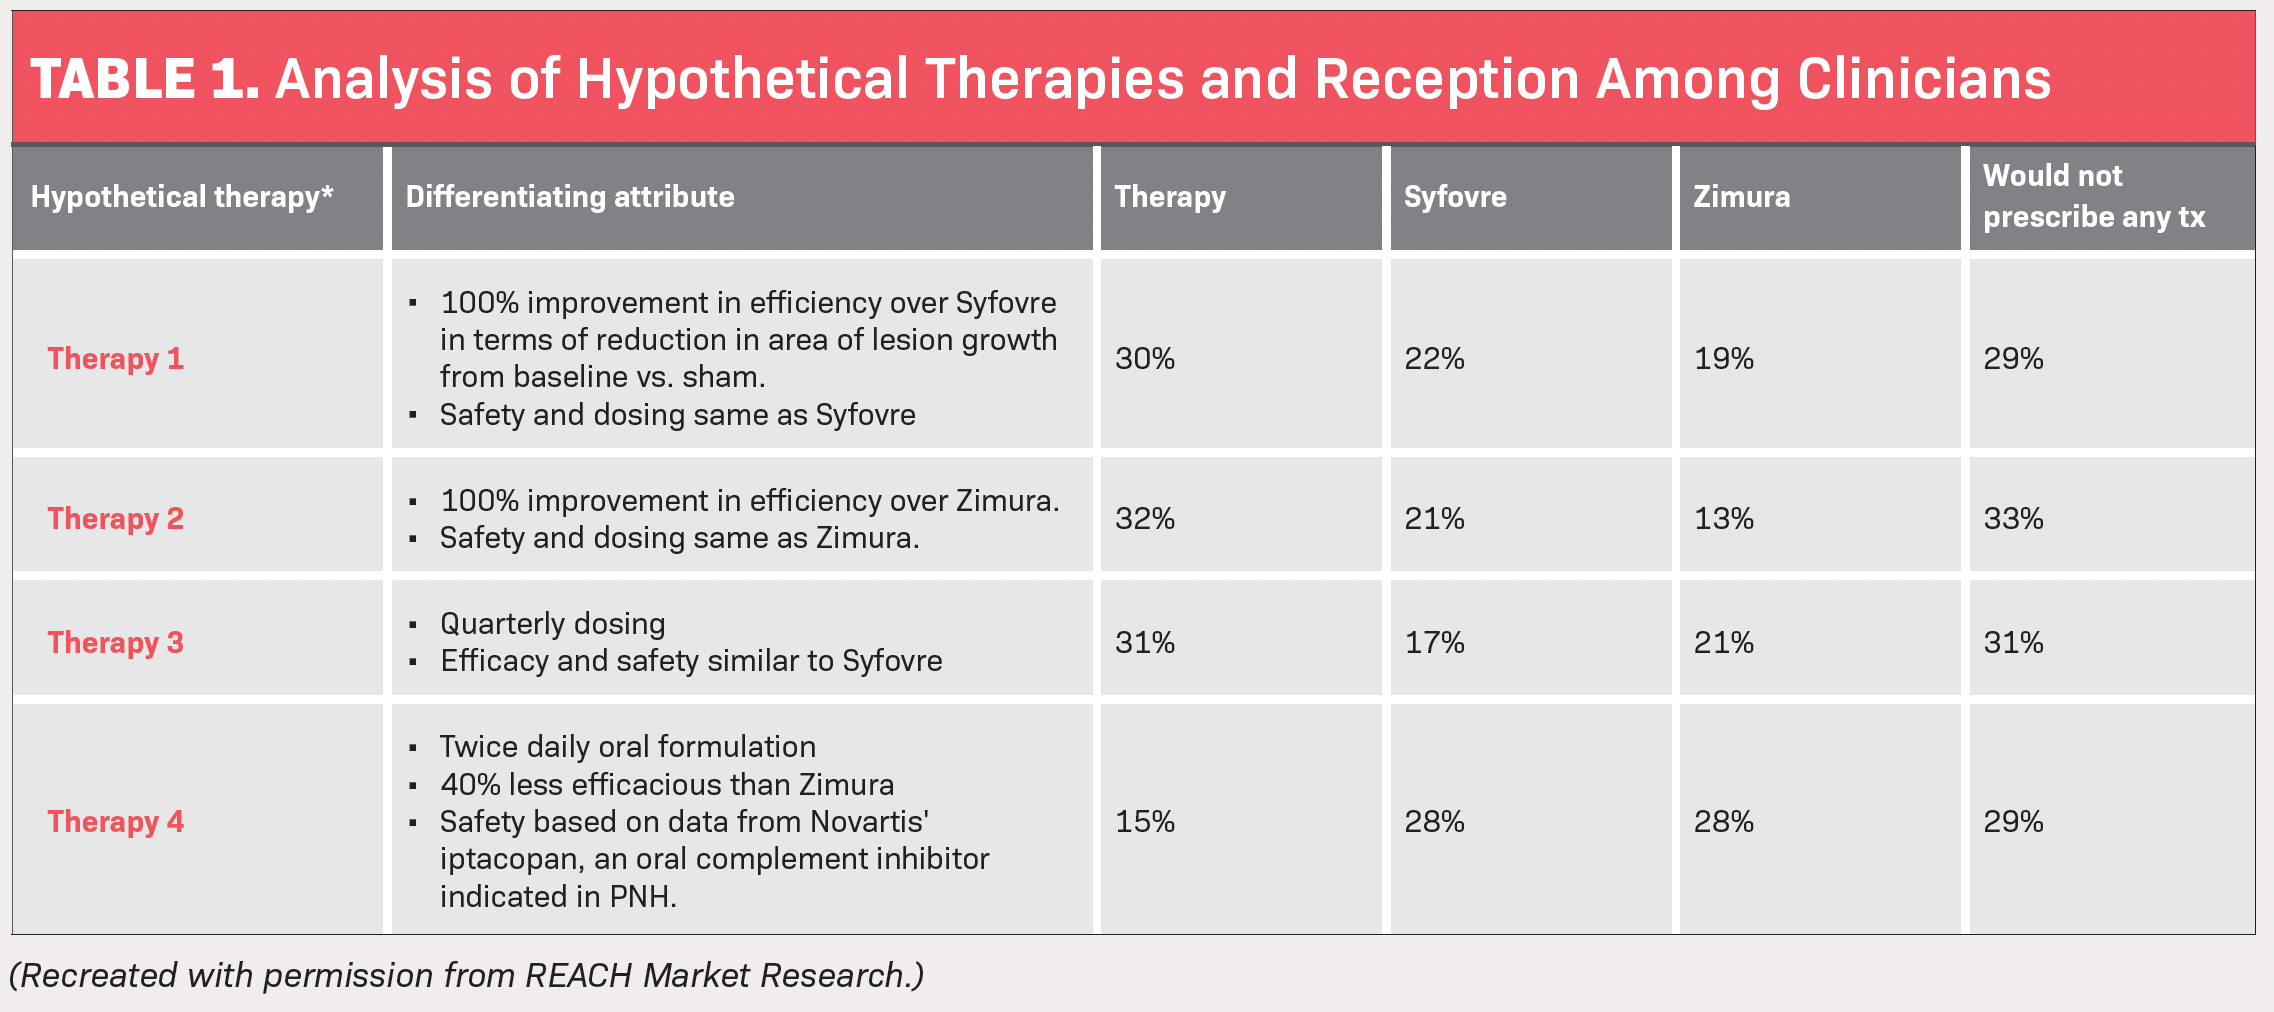 Table 1. Analysis of hypothetical therapies and reception among clinicians (recreated with permission from REACH Market Research)